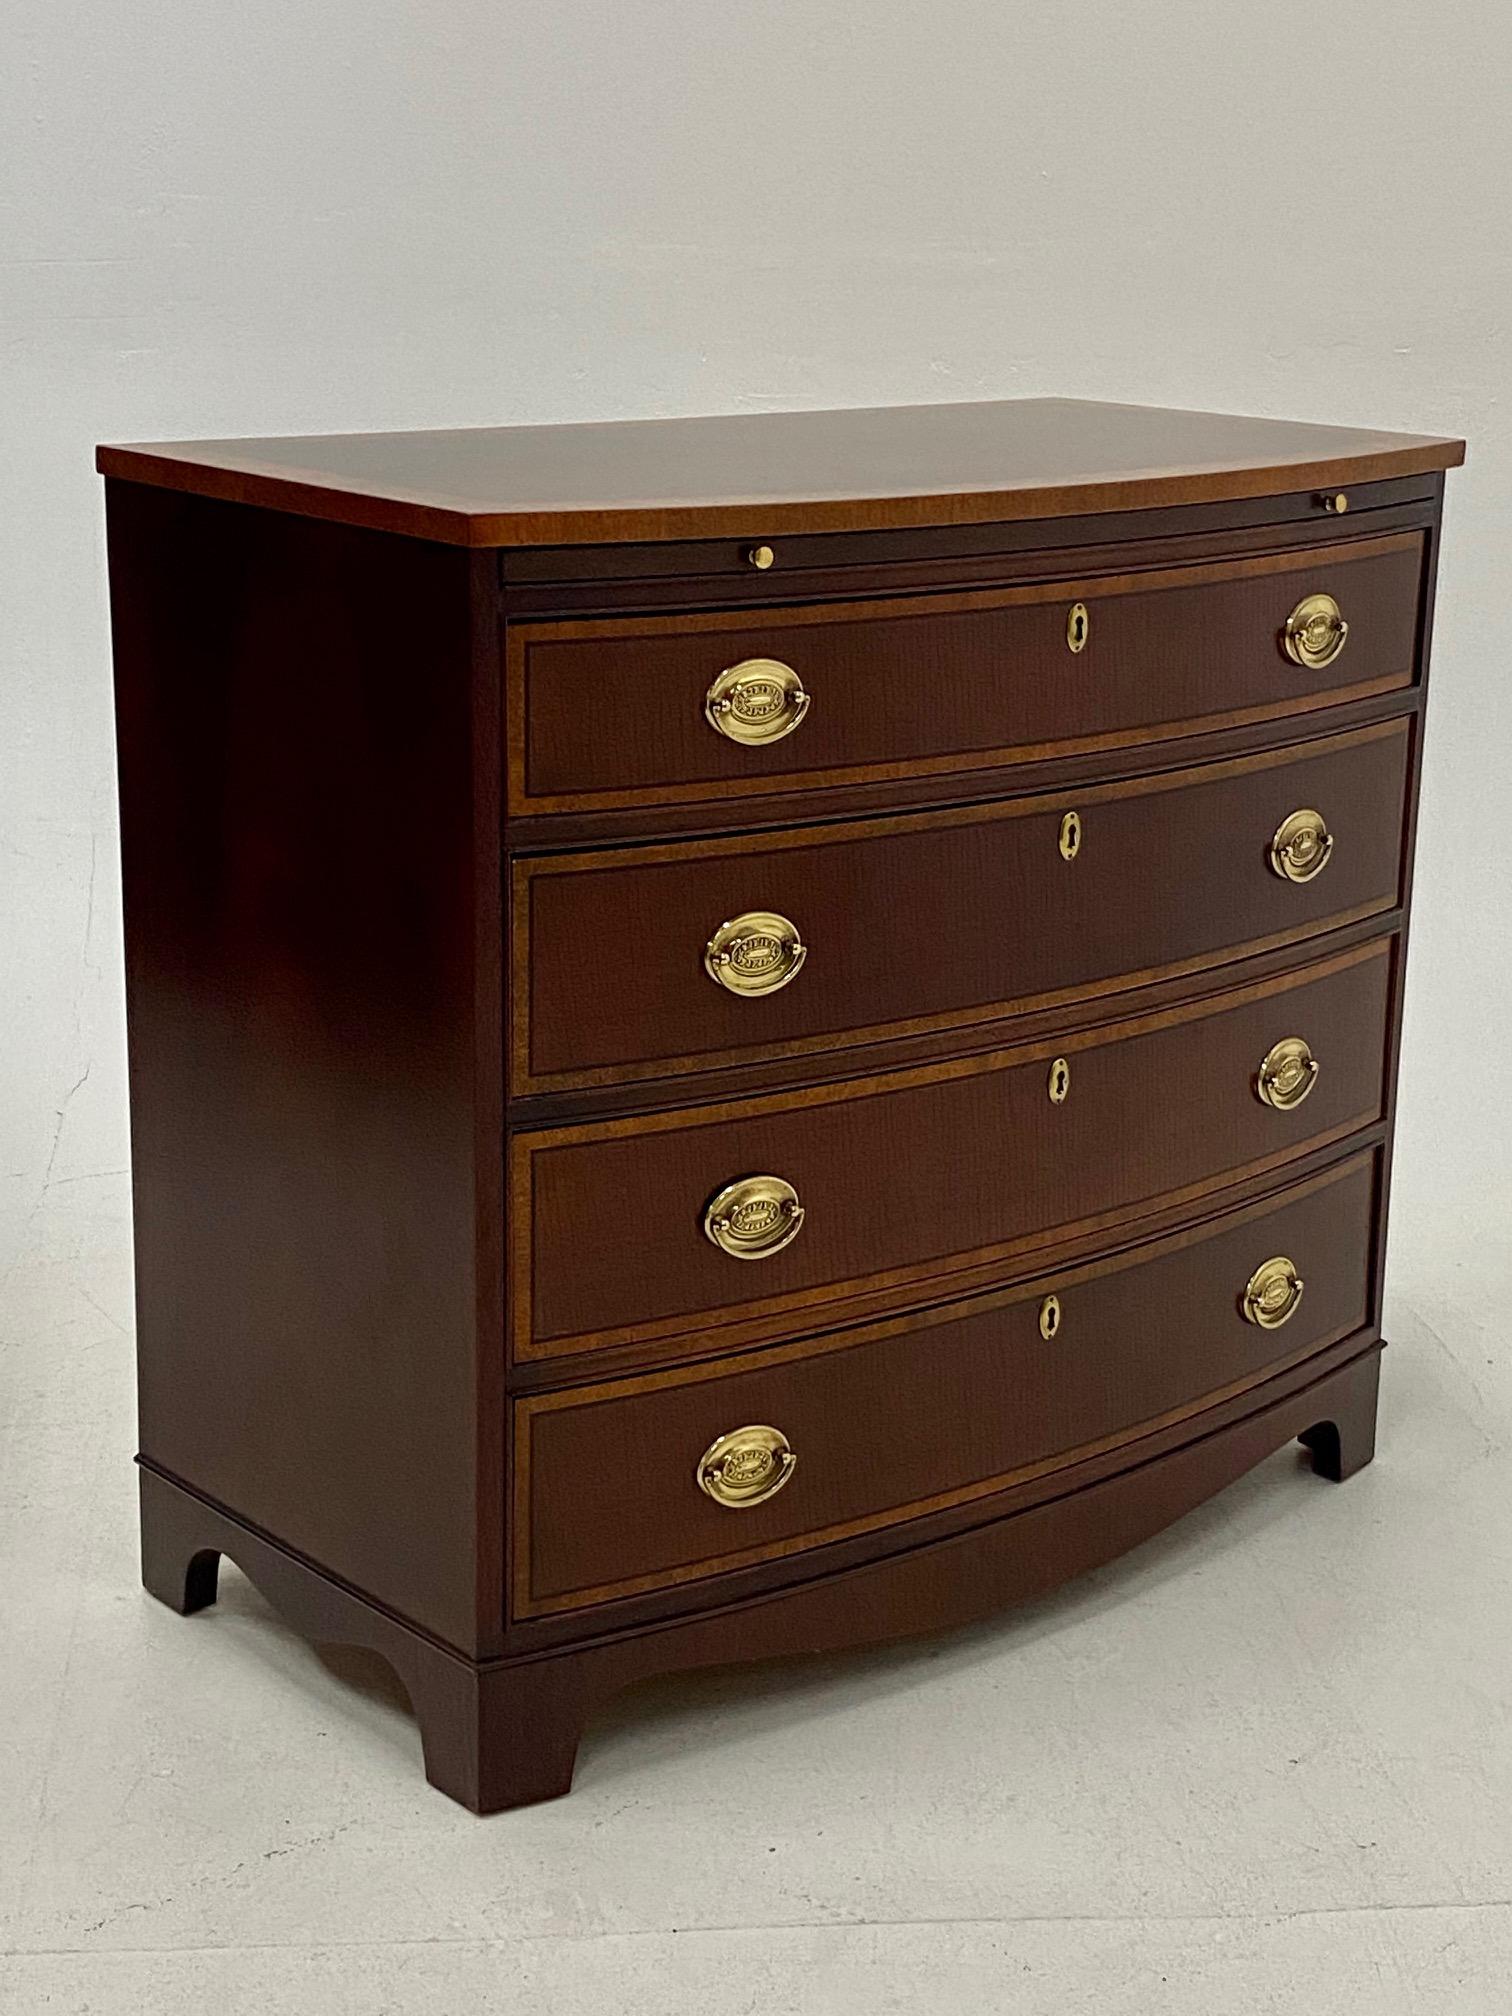 North American Handsome Bow Front Mahogany and Satinwood Bachelors Chest of Drawers